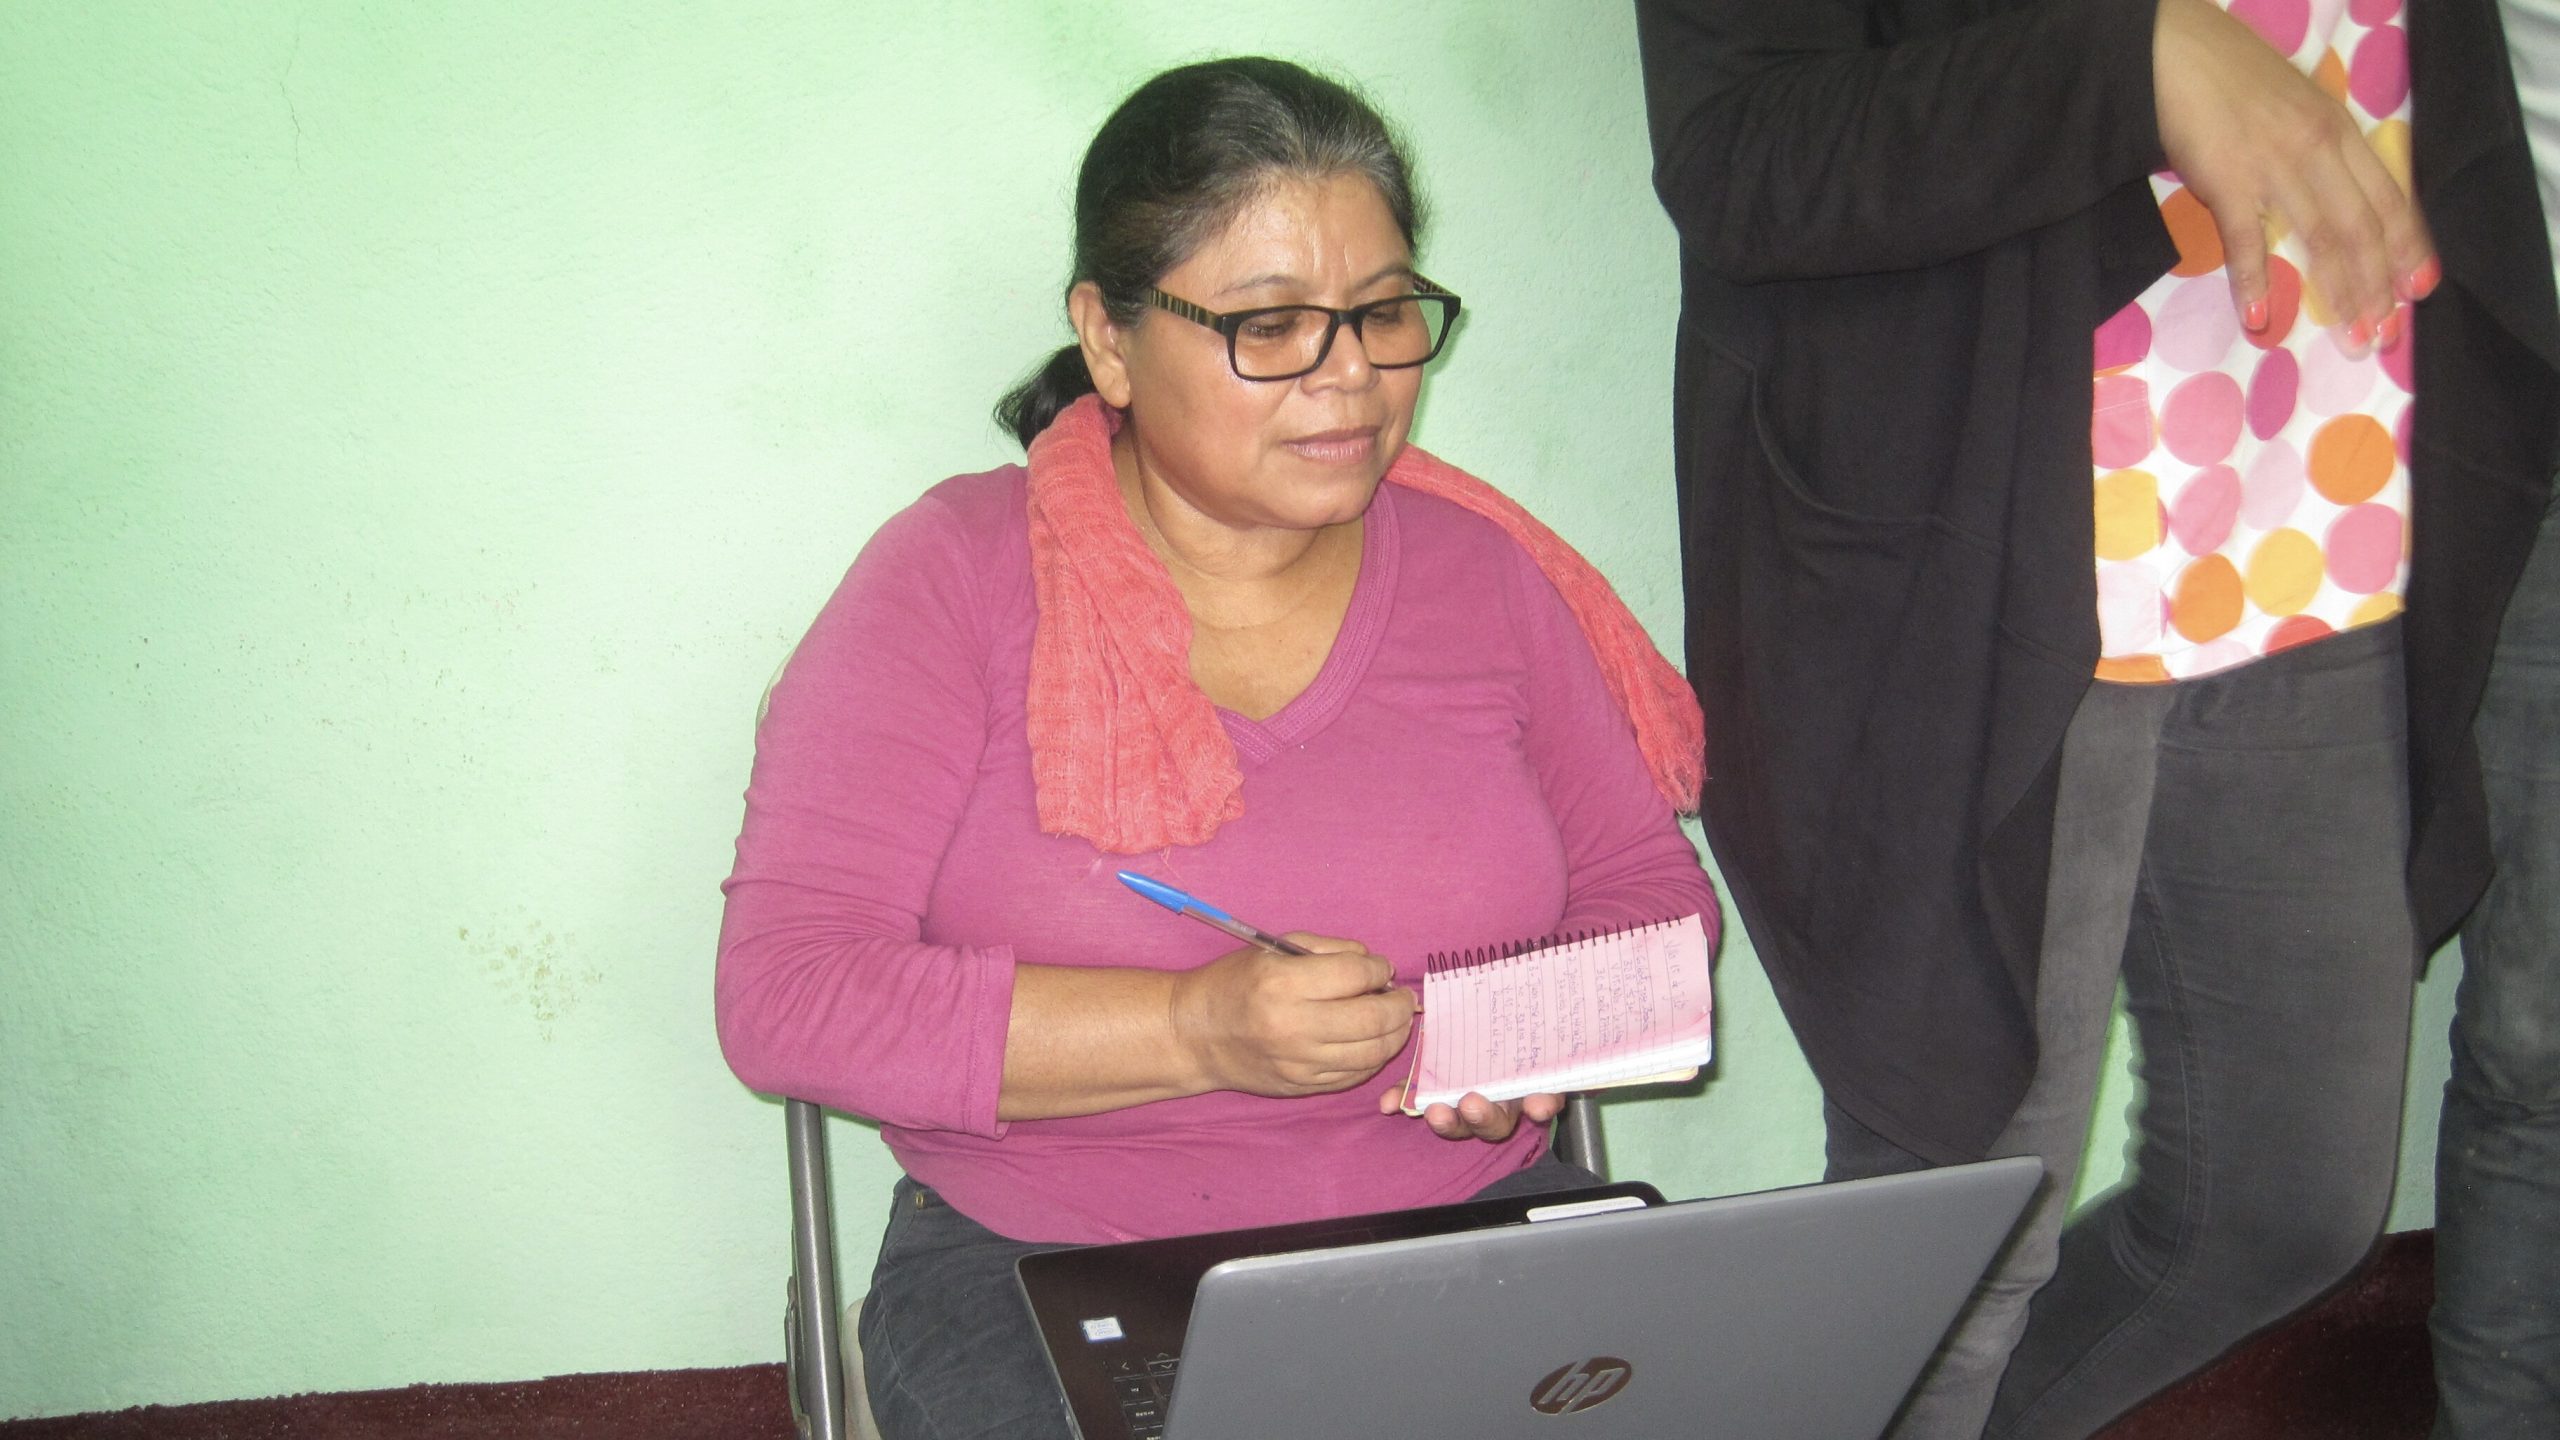 picture of Damaris López holding a computer in her lap, against a green plan wall.